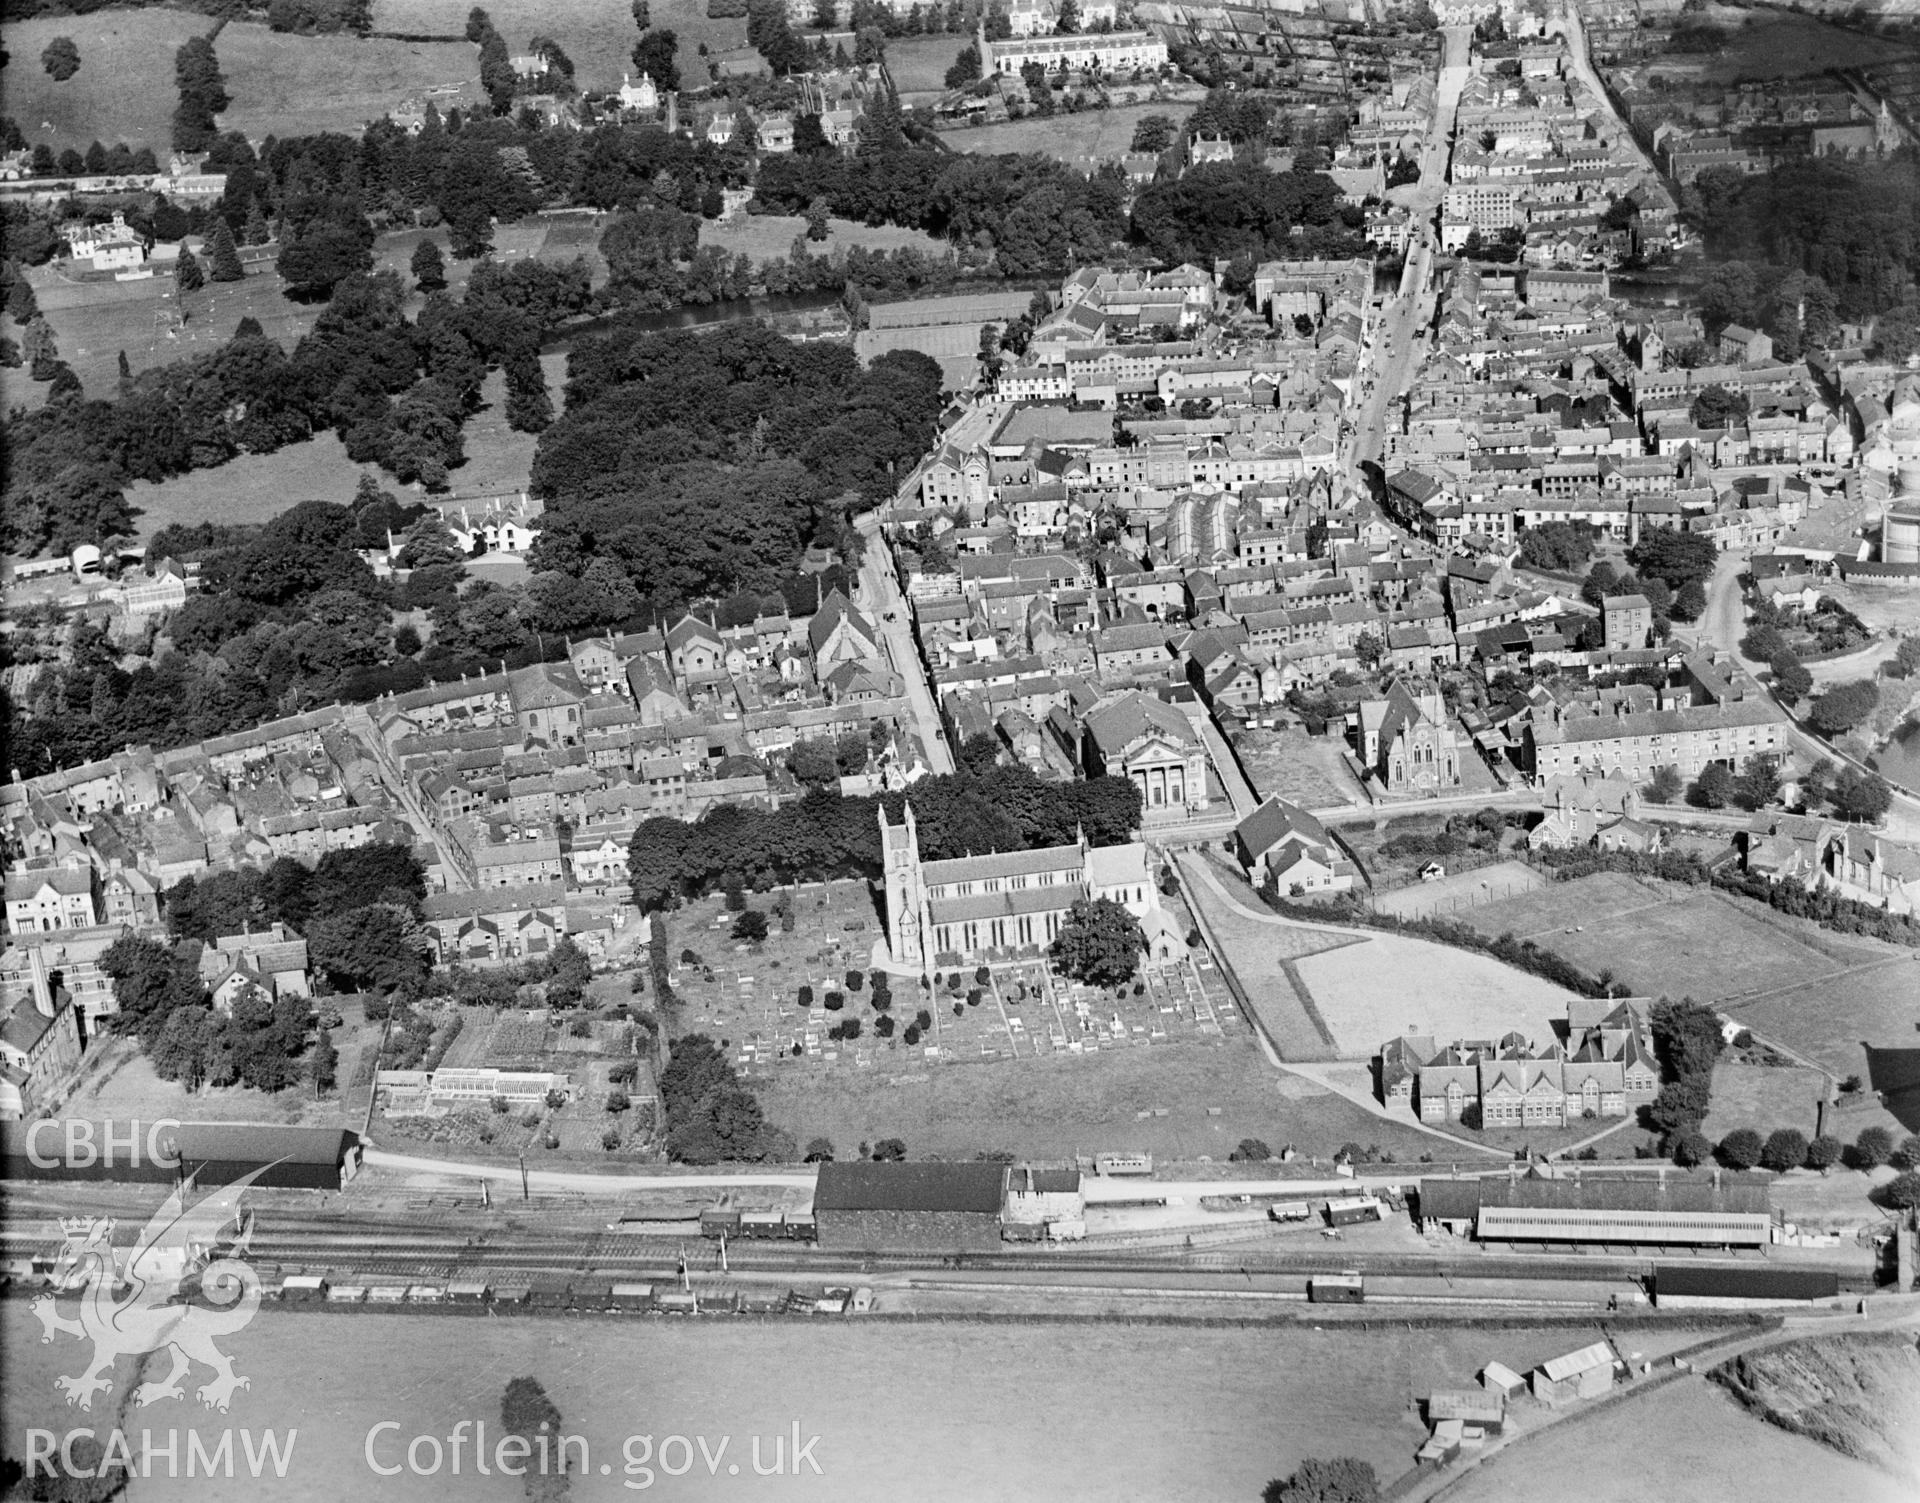 General view of Newtown, showing station and St Marys church, oblique aerial view. 5?x4? black and white glass plate negative.